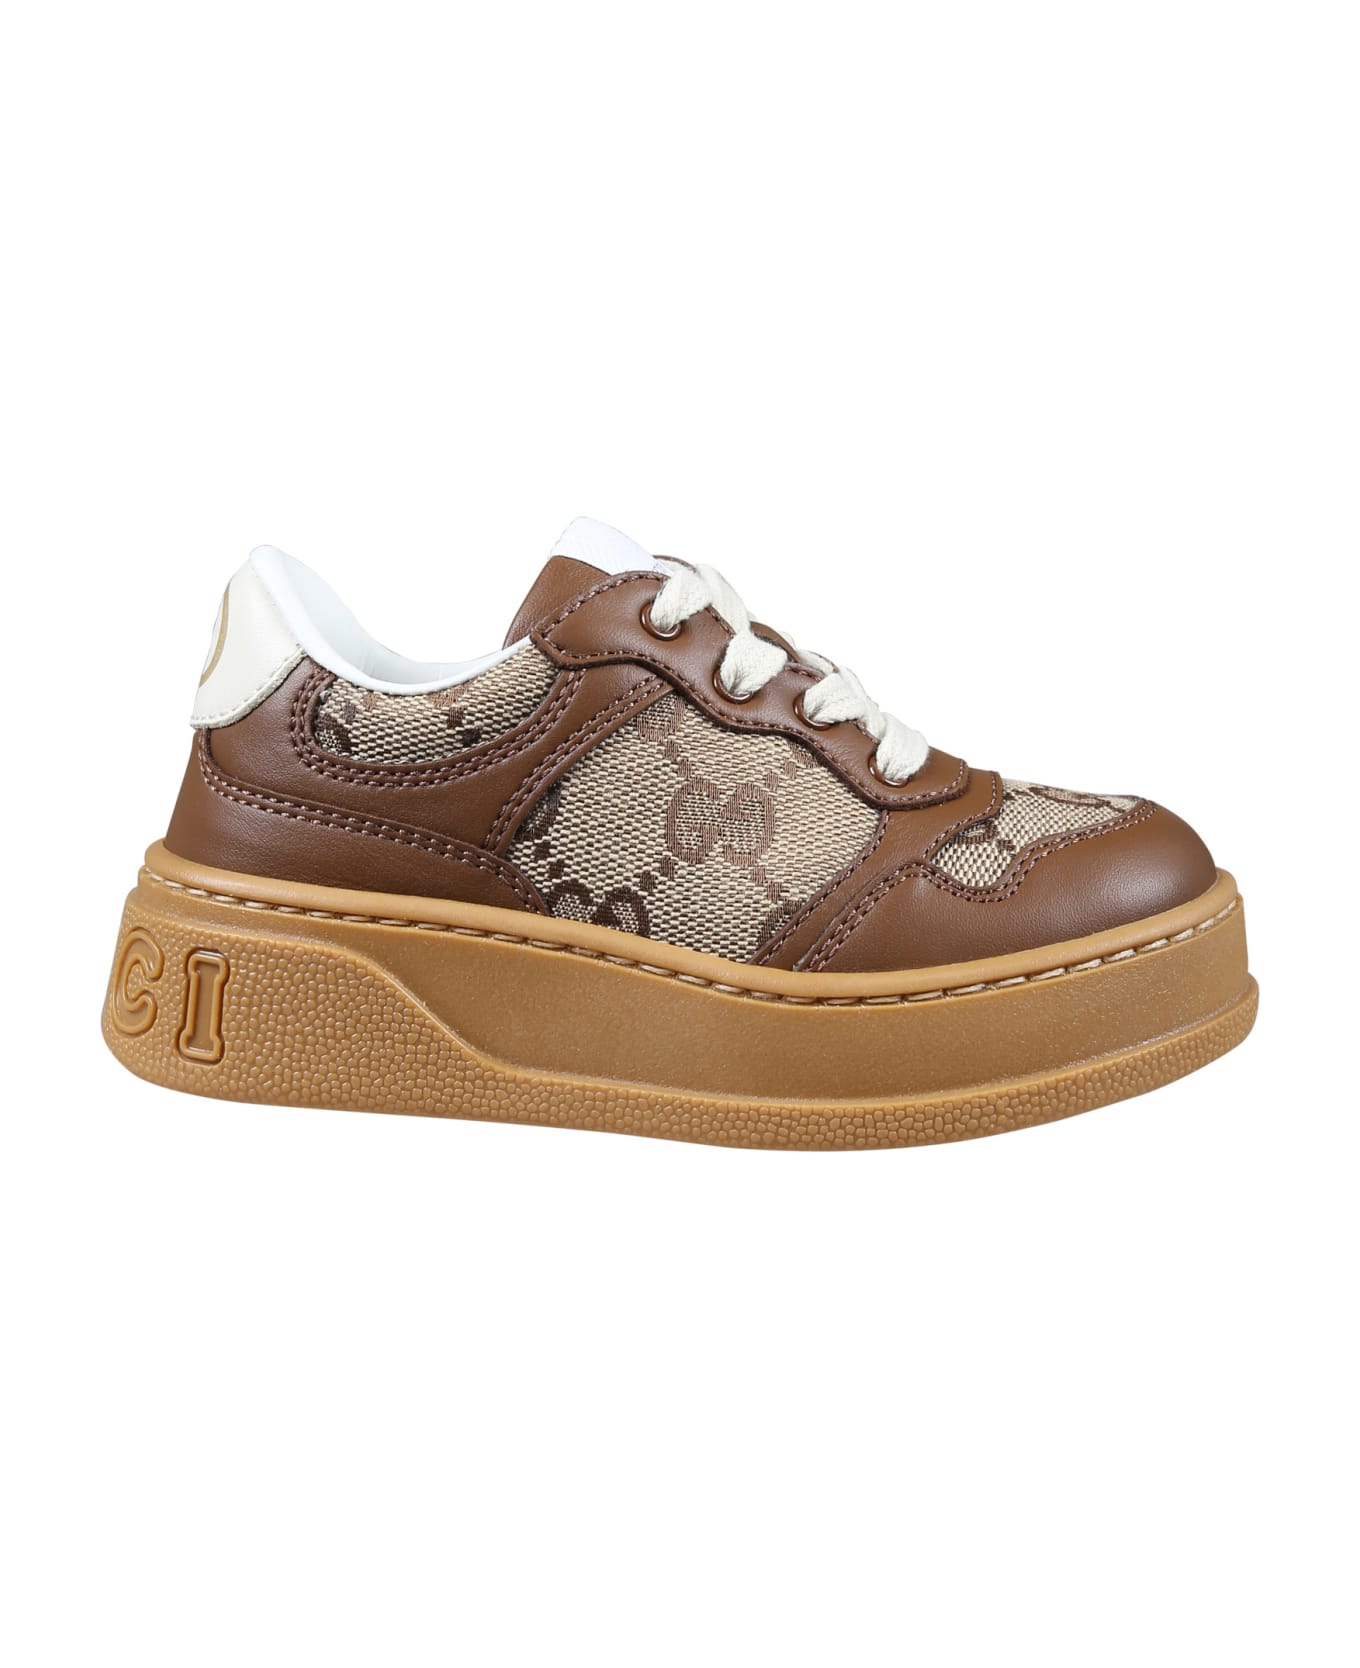 Gucci Brown Sneakers For Kids With Iconic Gg - Brown